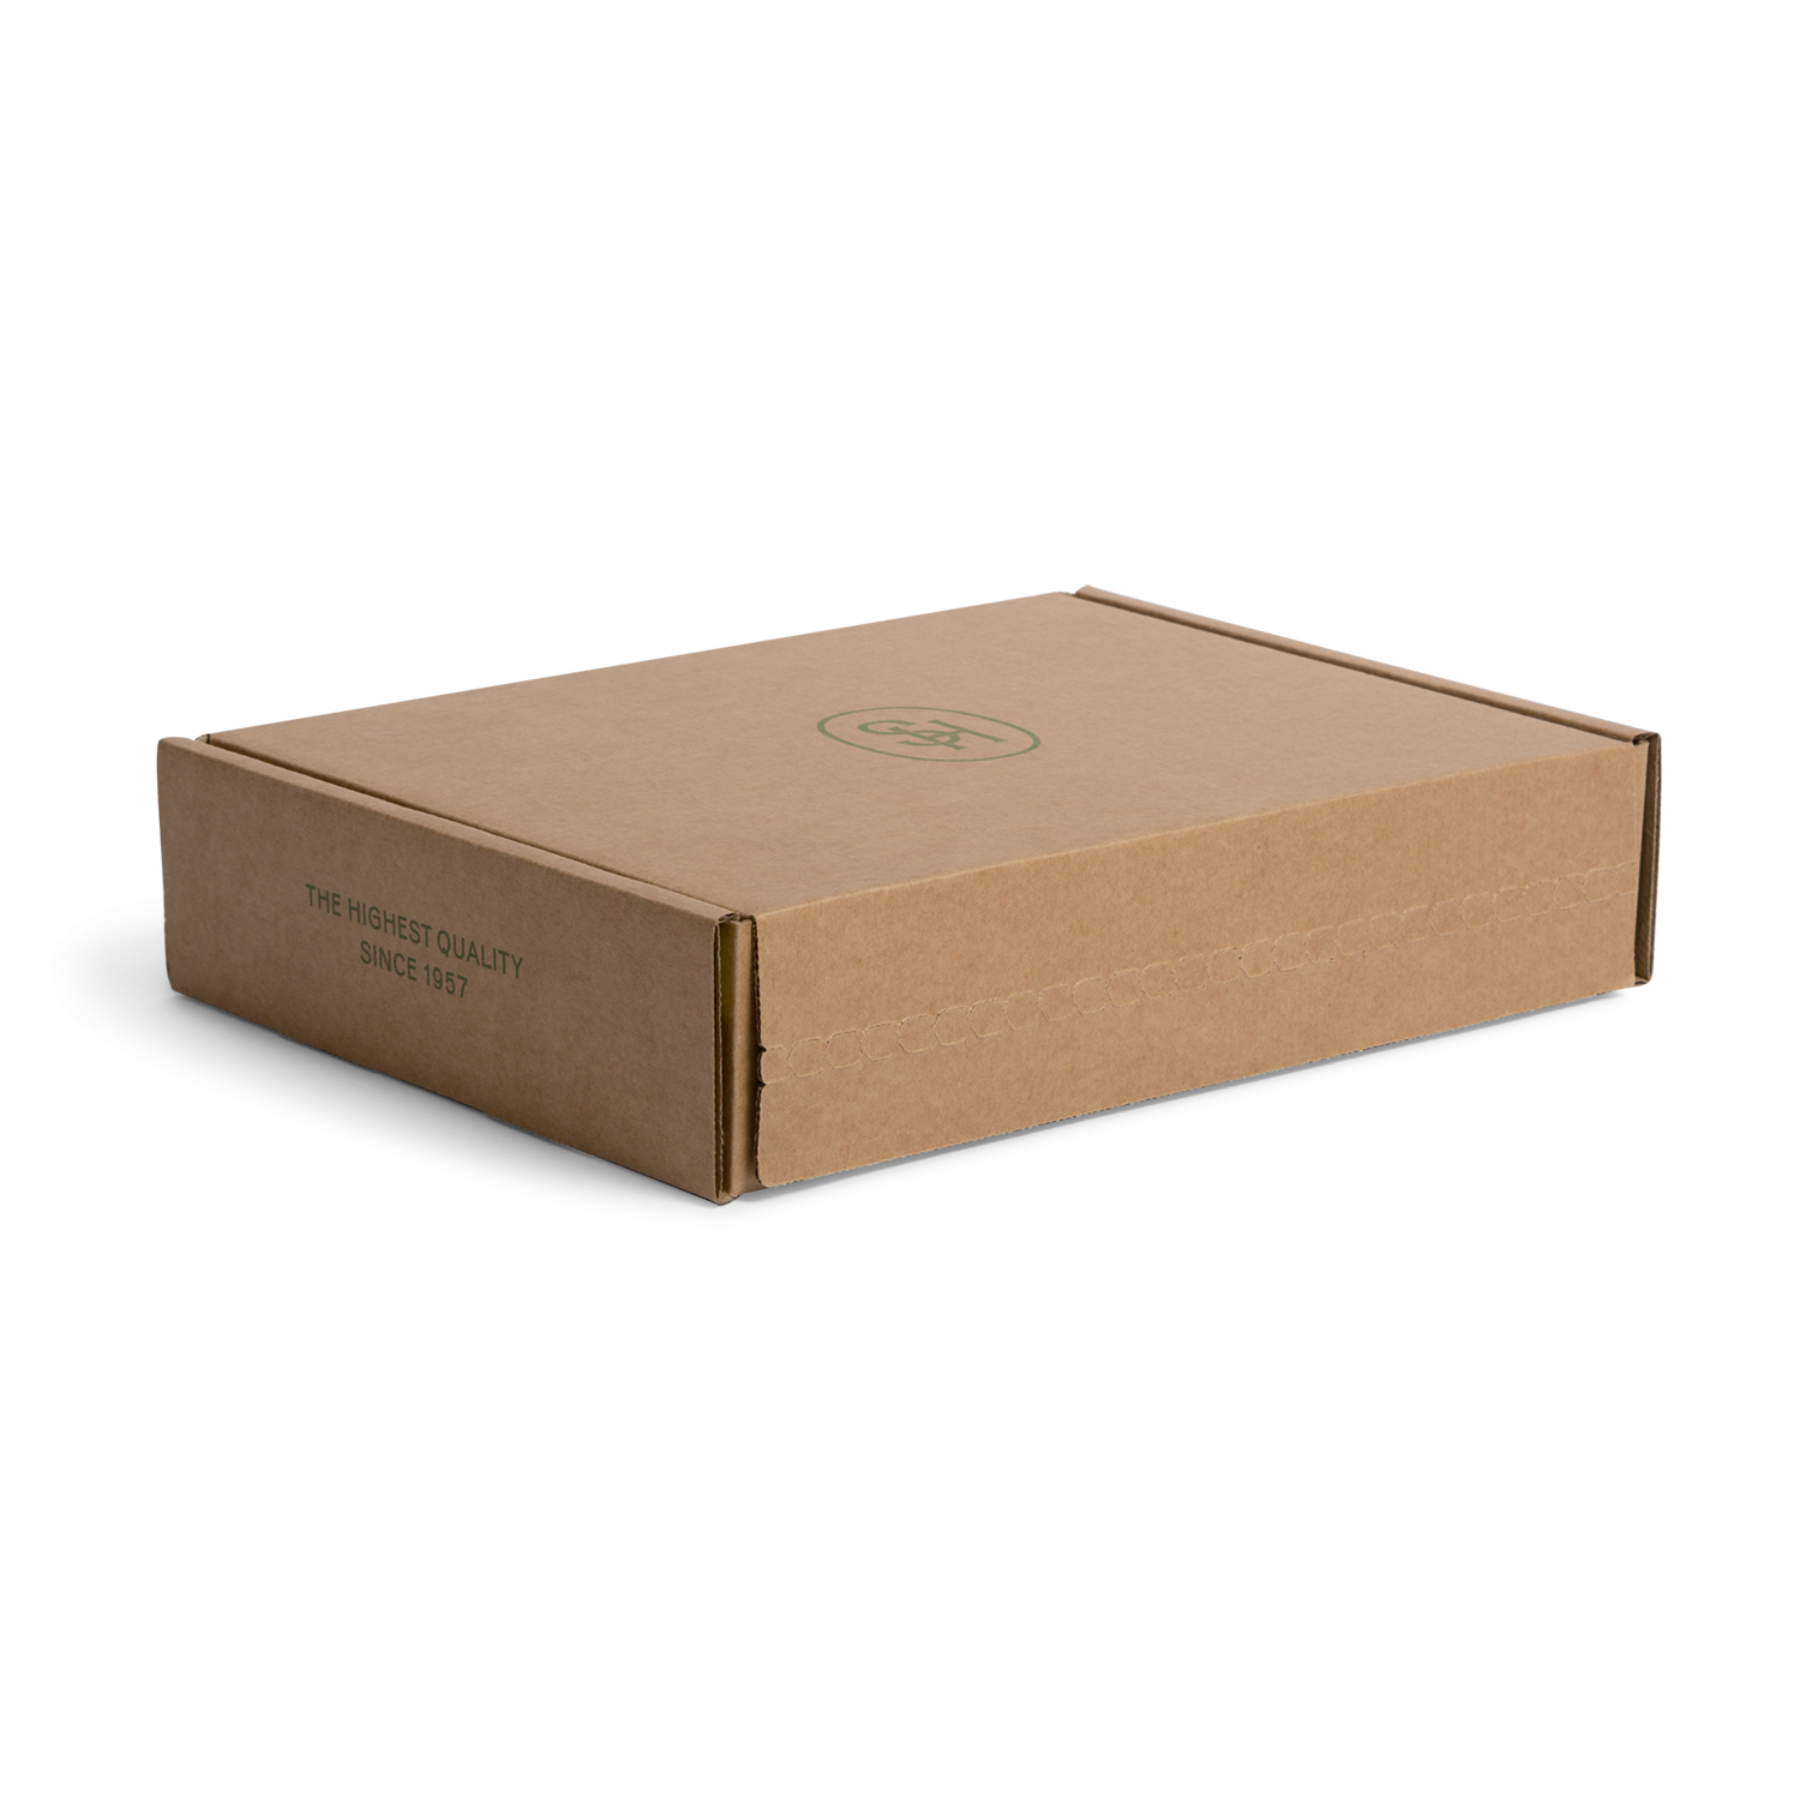 The Spice House uses Lumi to produce mailer boxes with a tear strip and adhesive strip Packaging Strategies for Efficient Returns